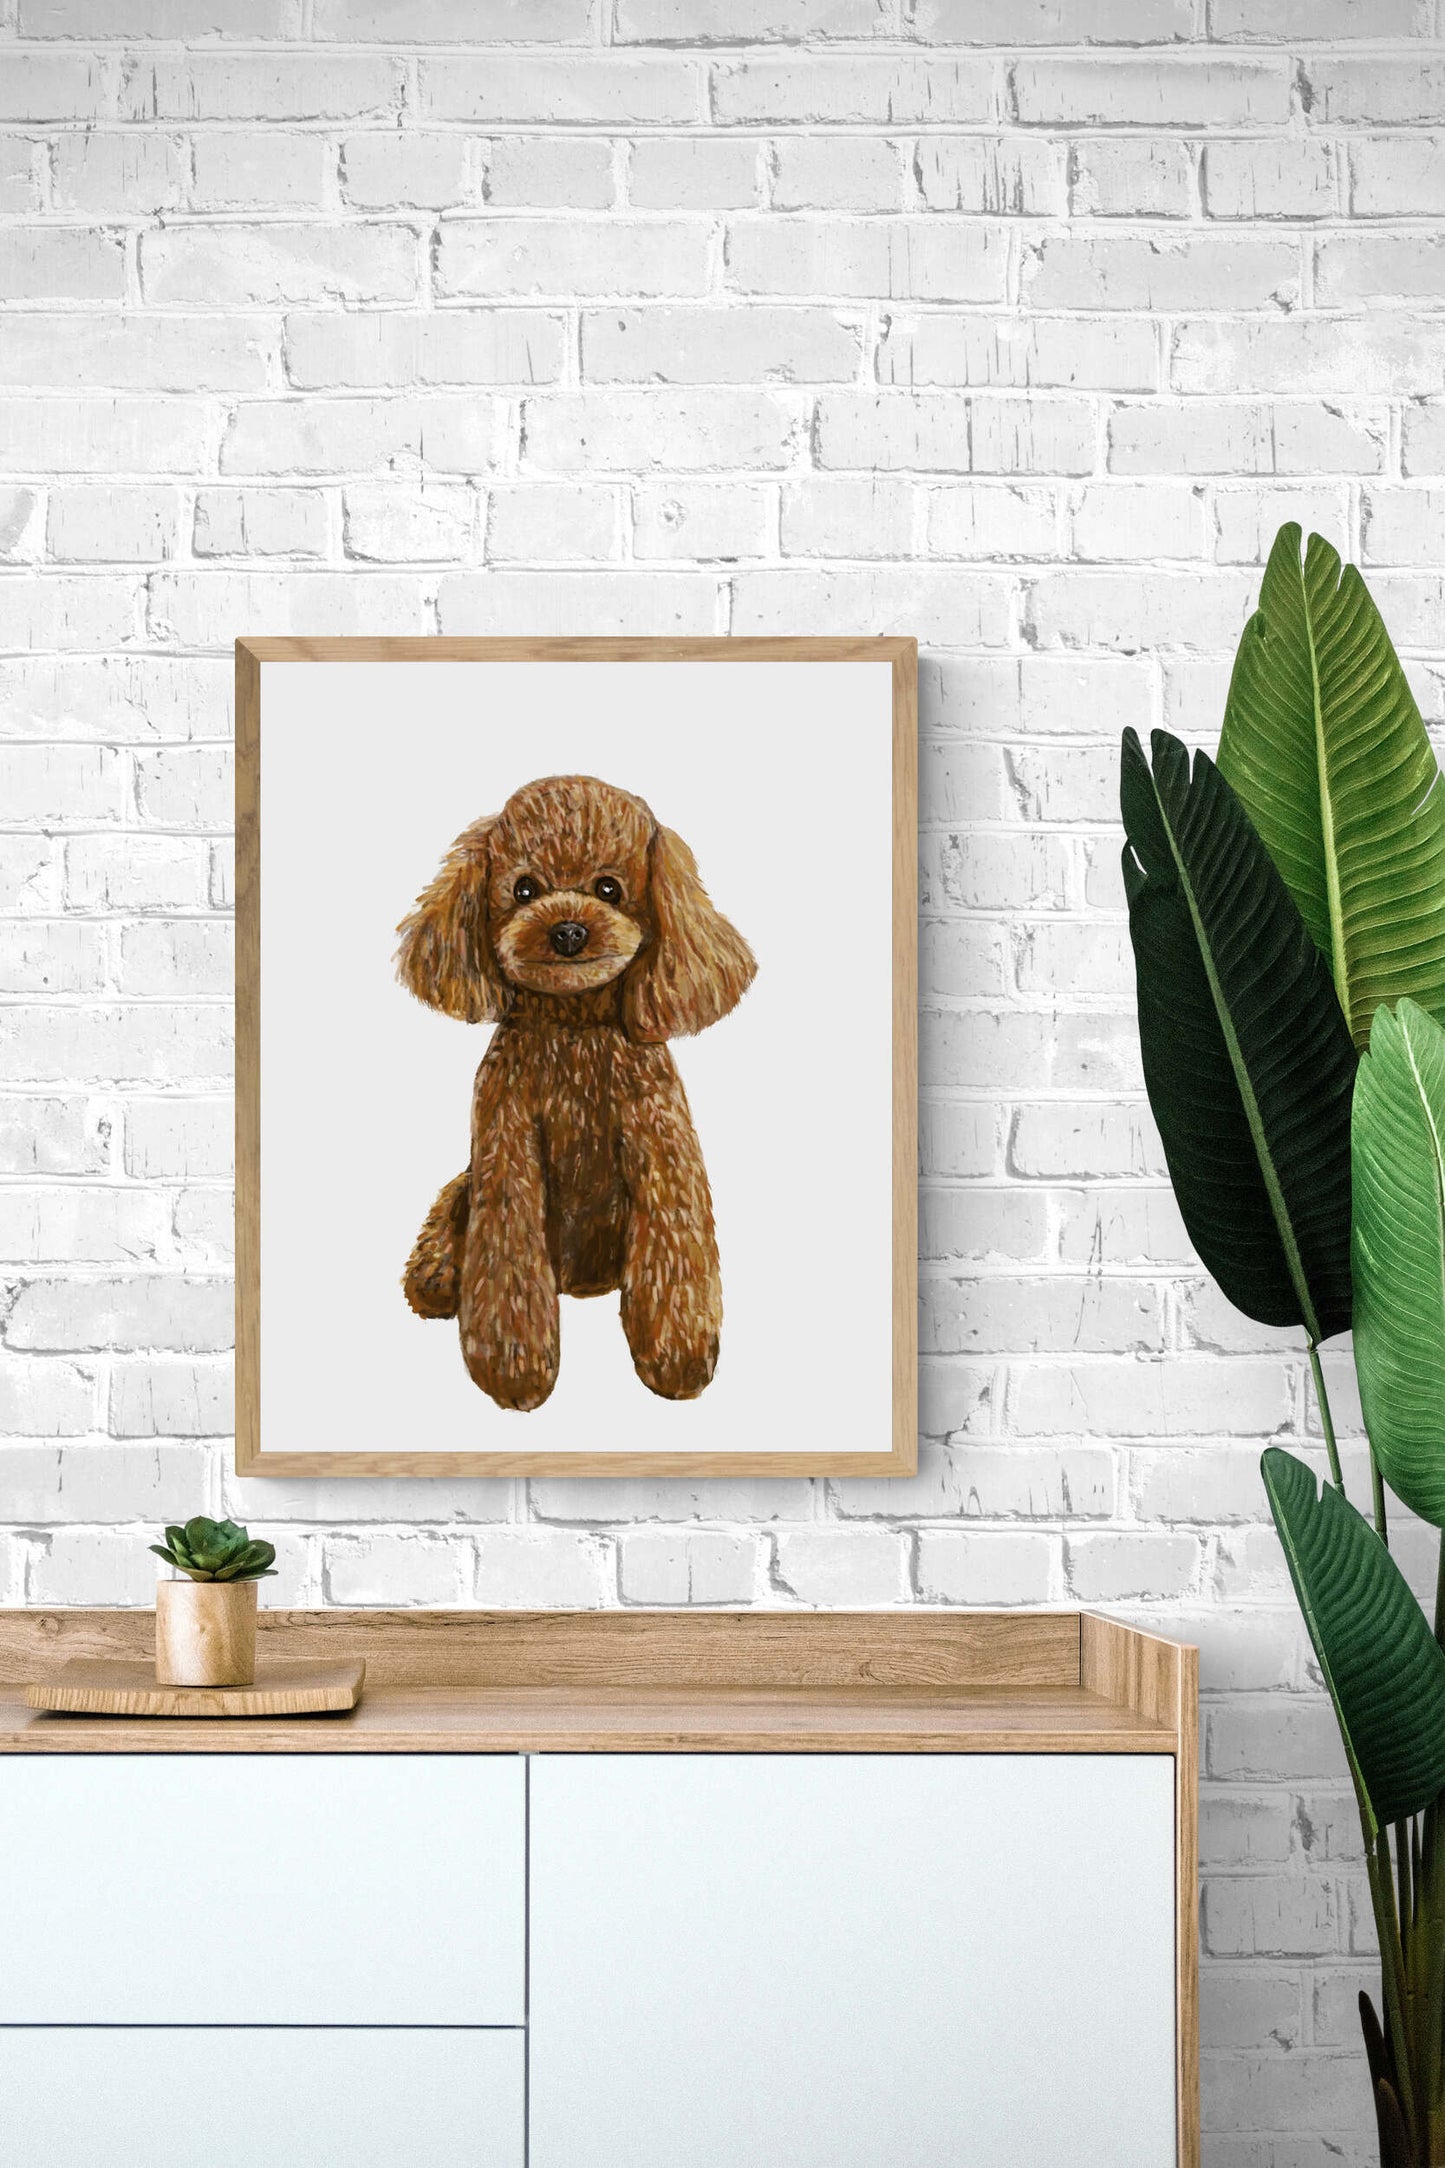 Cute Poodle Print, Poodle Portrait, Doggy Artwork, Brown Poodle Painting, Living Room Wall Art, Bedroom Wall Print, Puppy Home Decor